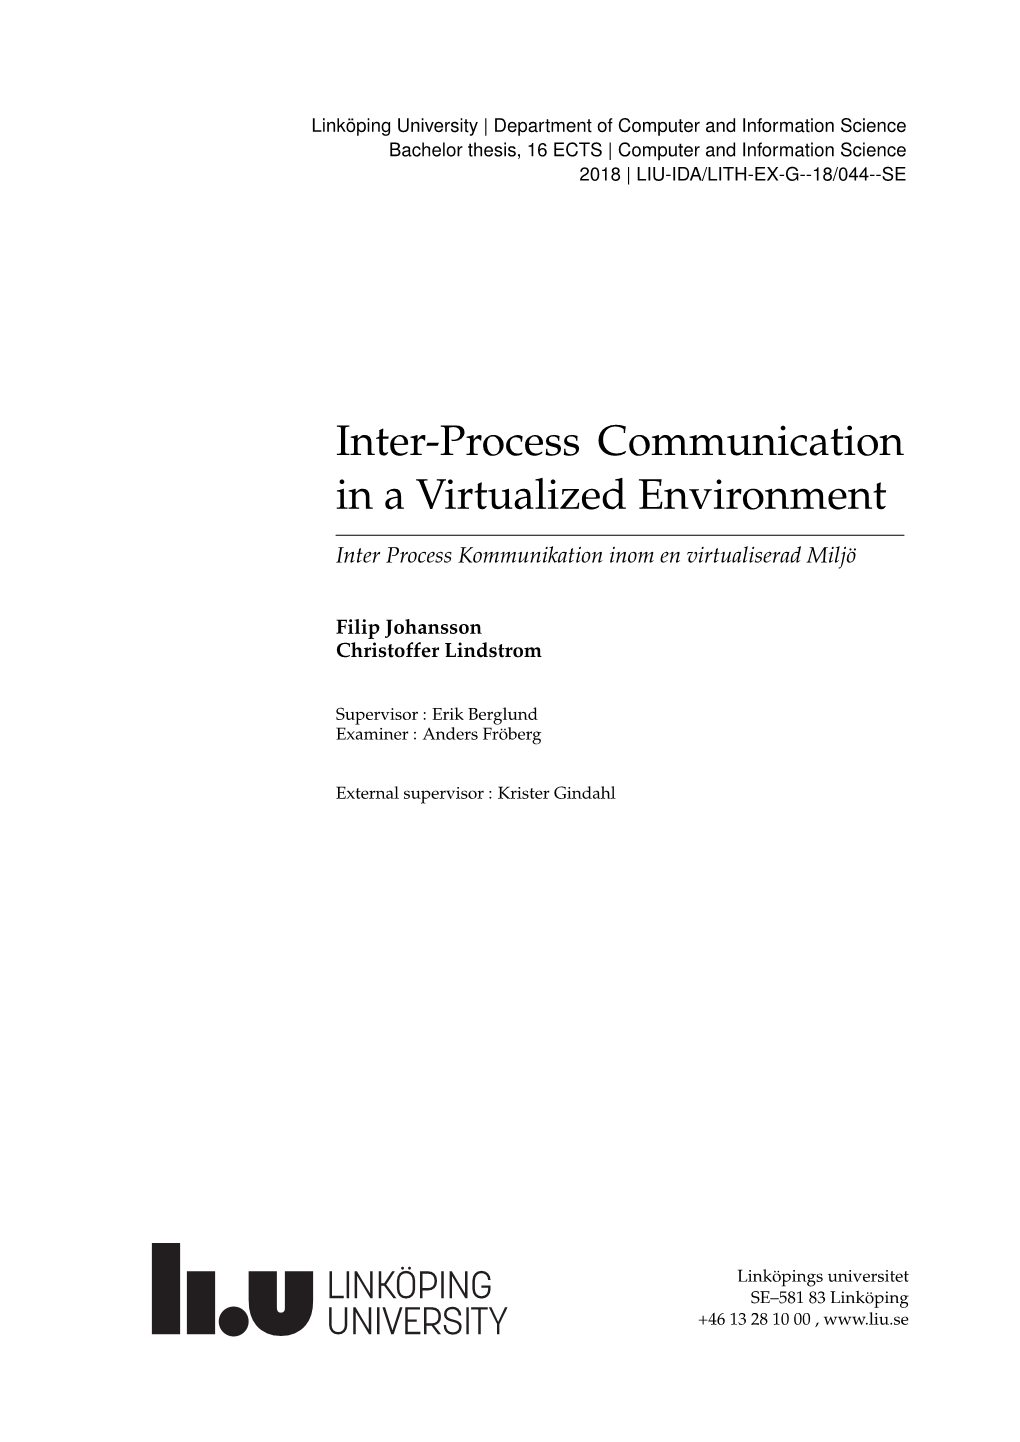 Inter-Process Communication in a Virtualized Environment